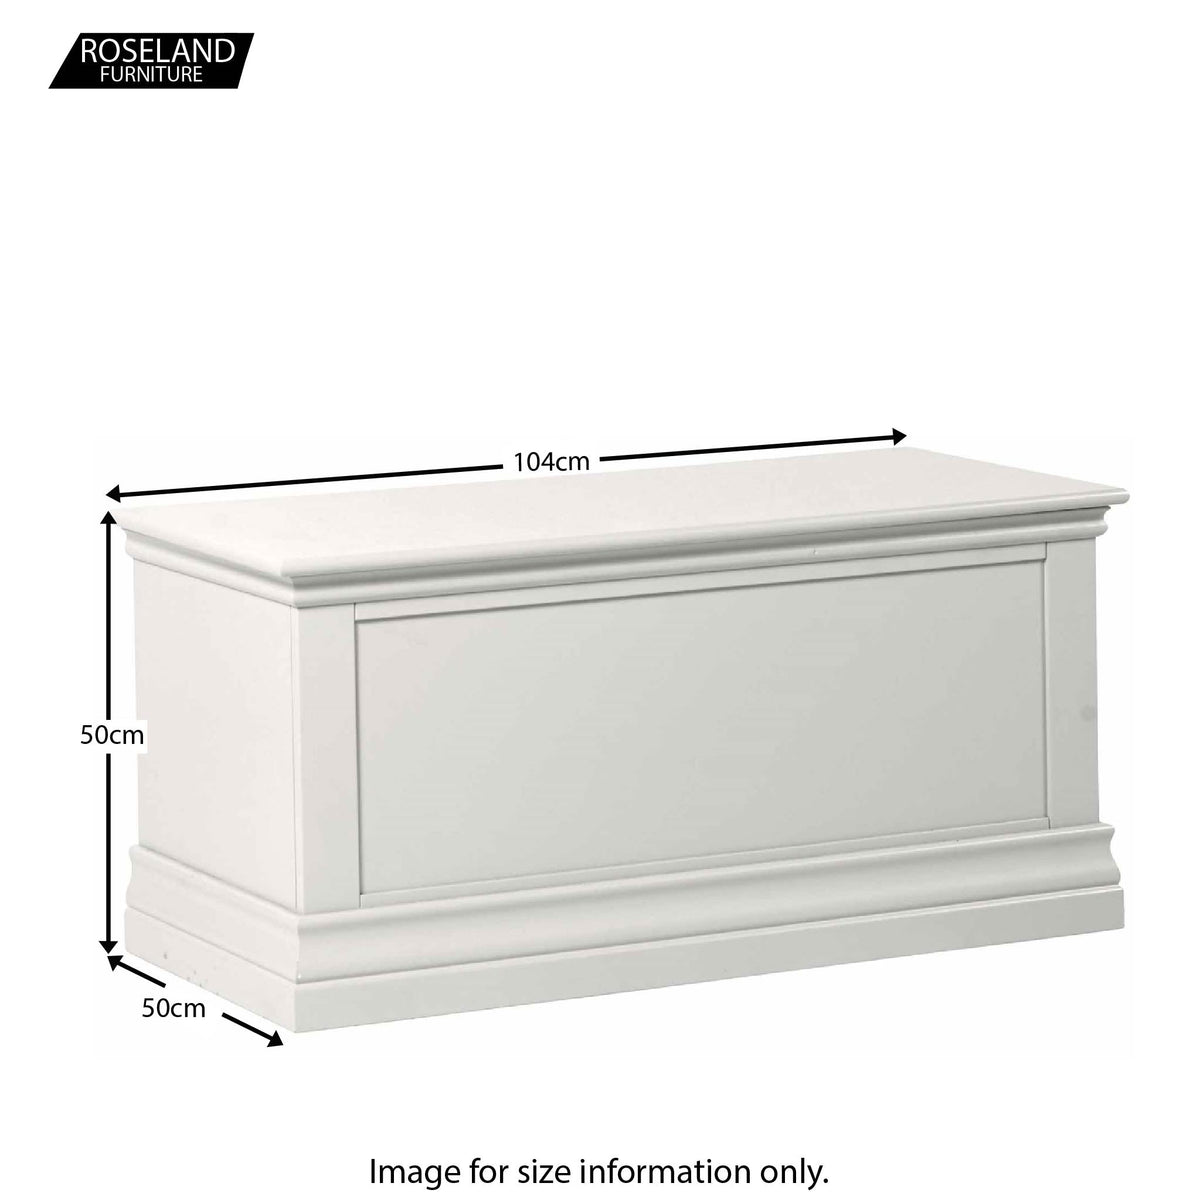 Dimensions for the Melrose White Blanket Storage Chest from Roseland Furniture